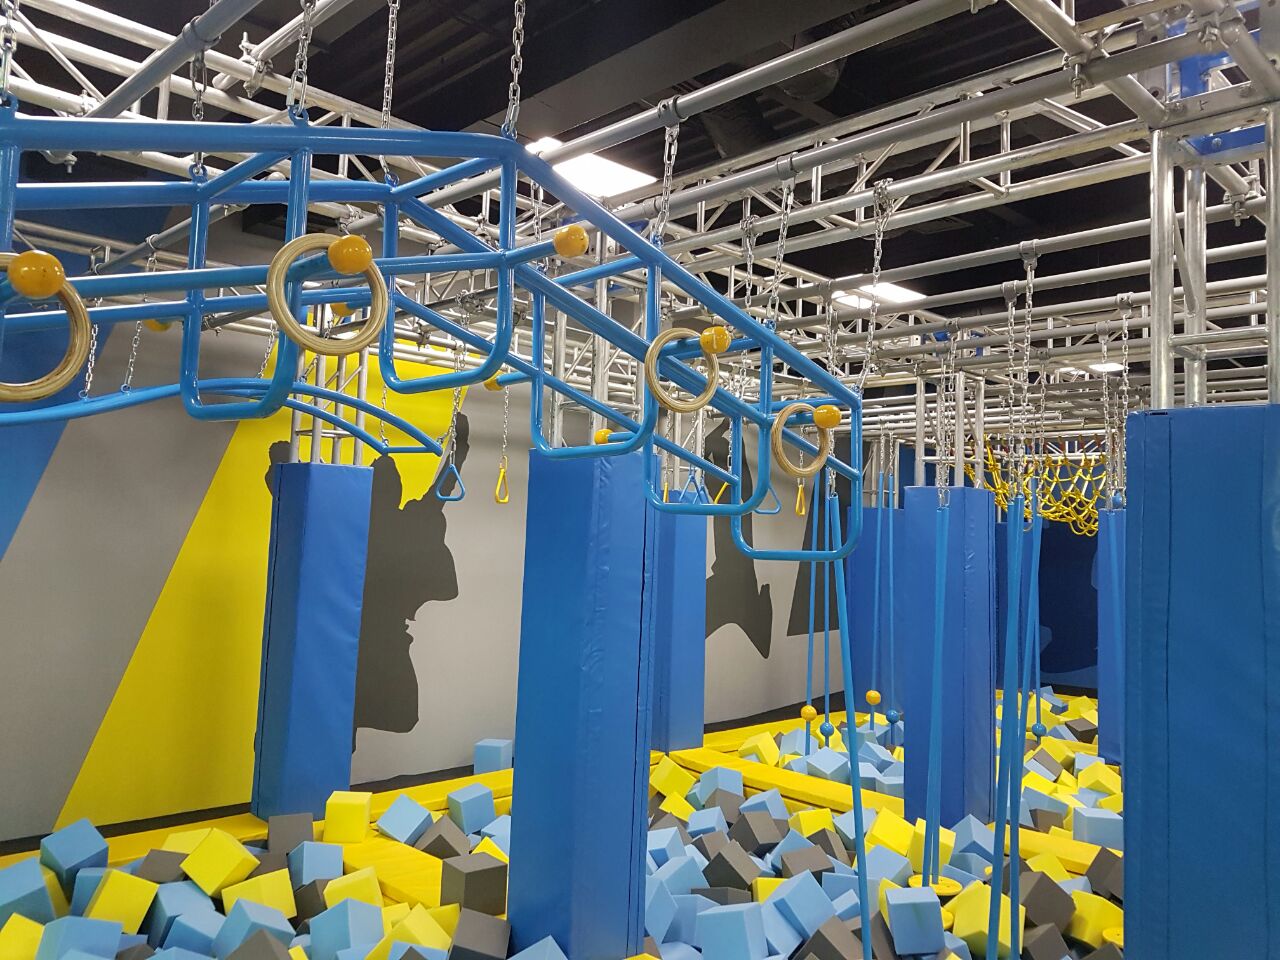 How to make better use of indoor playground equipment?